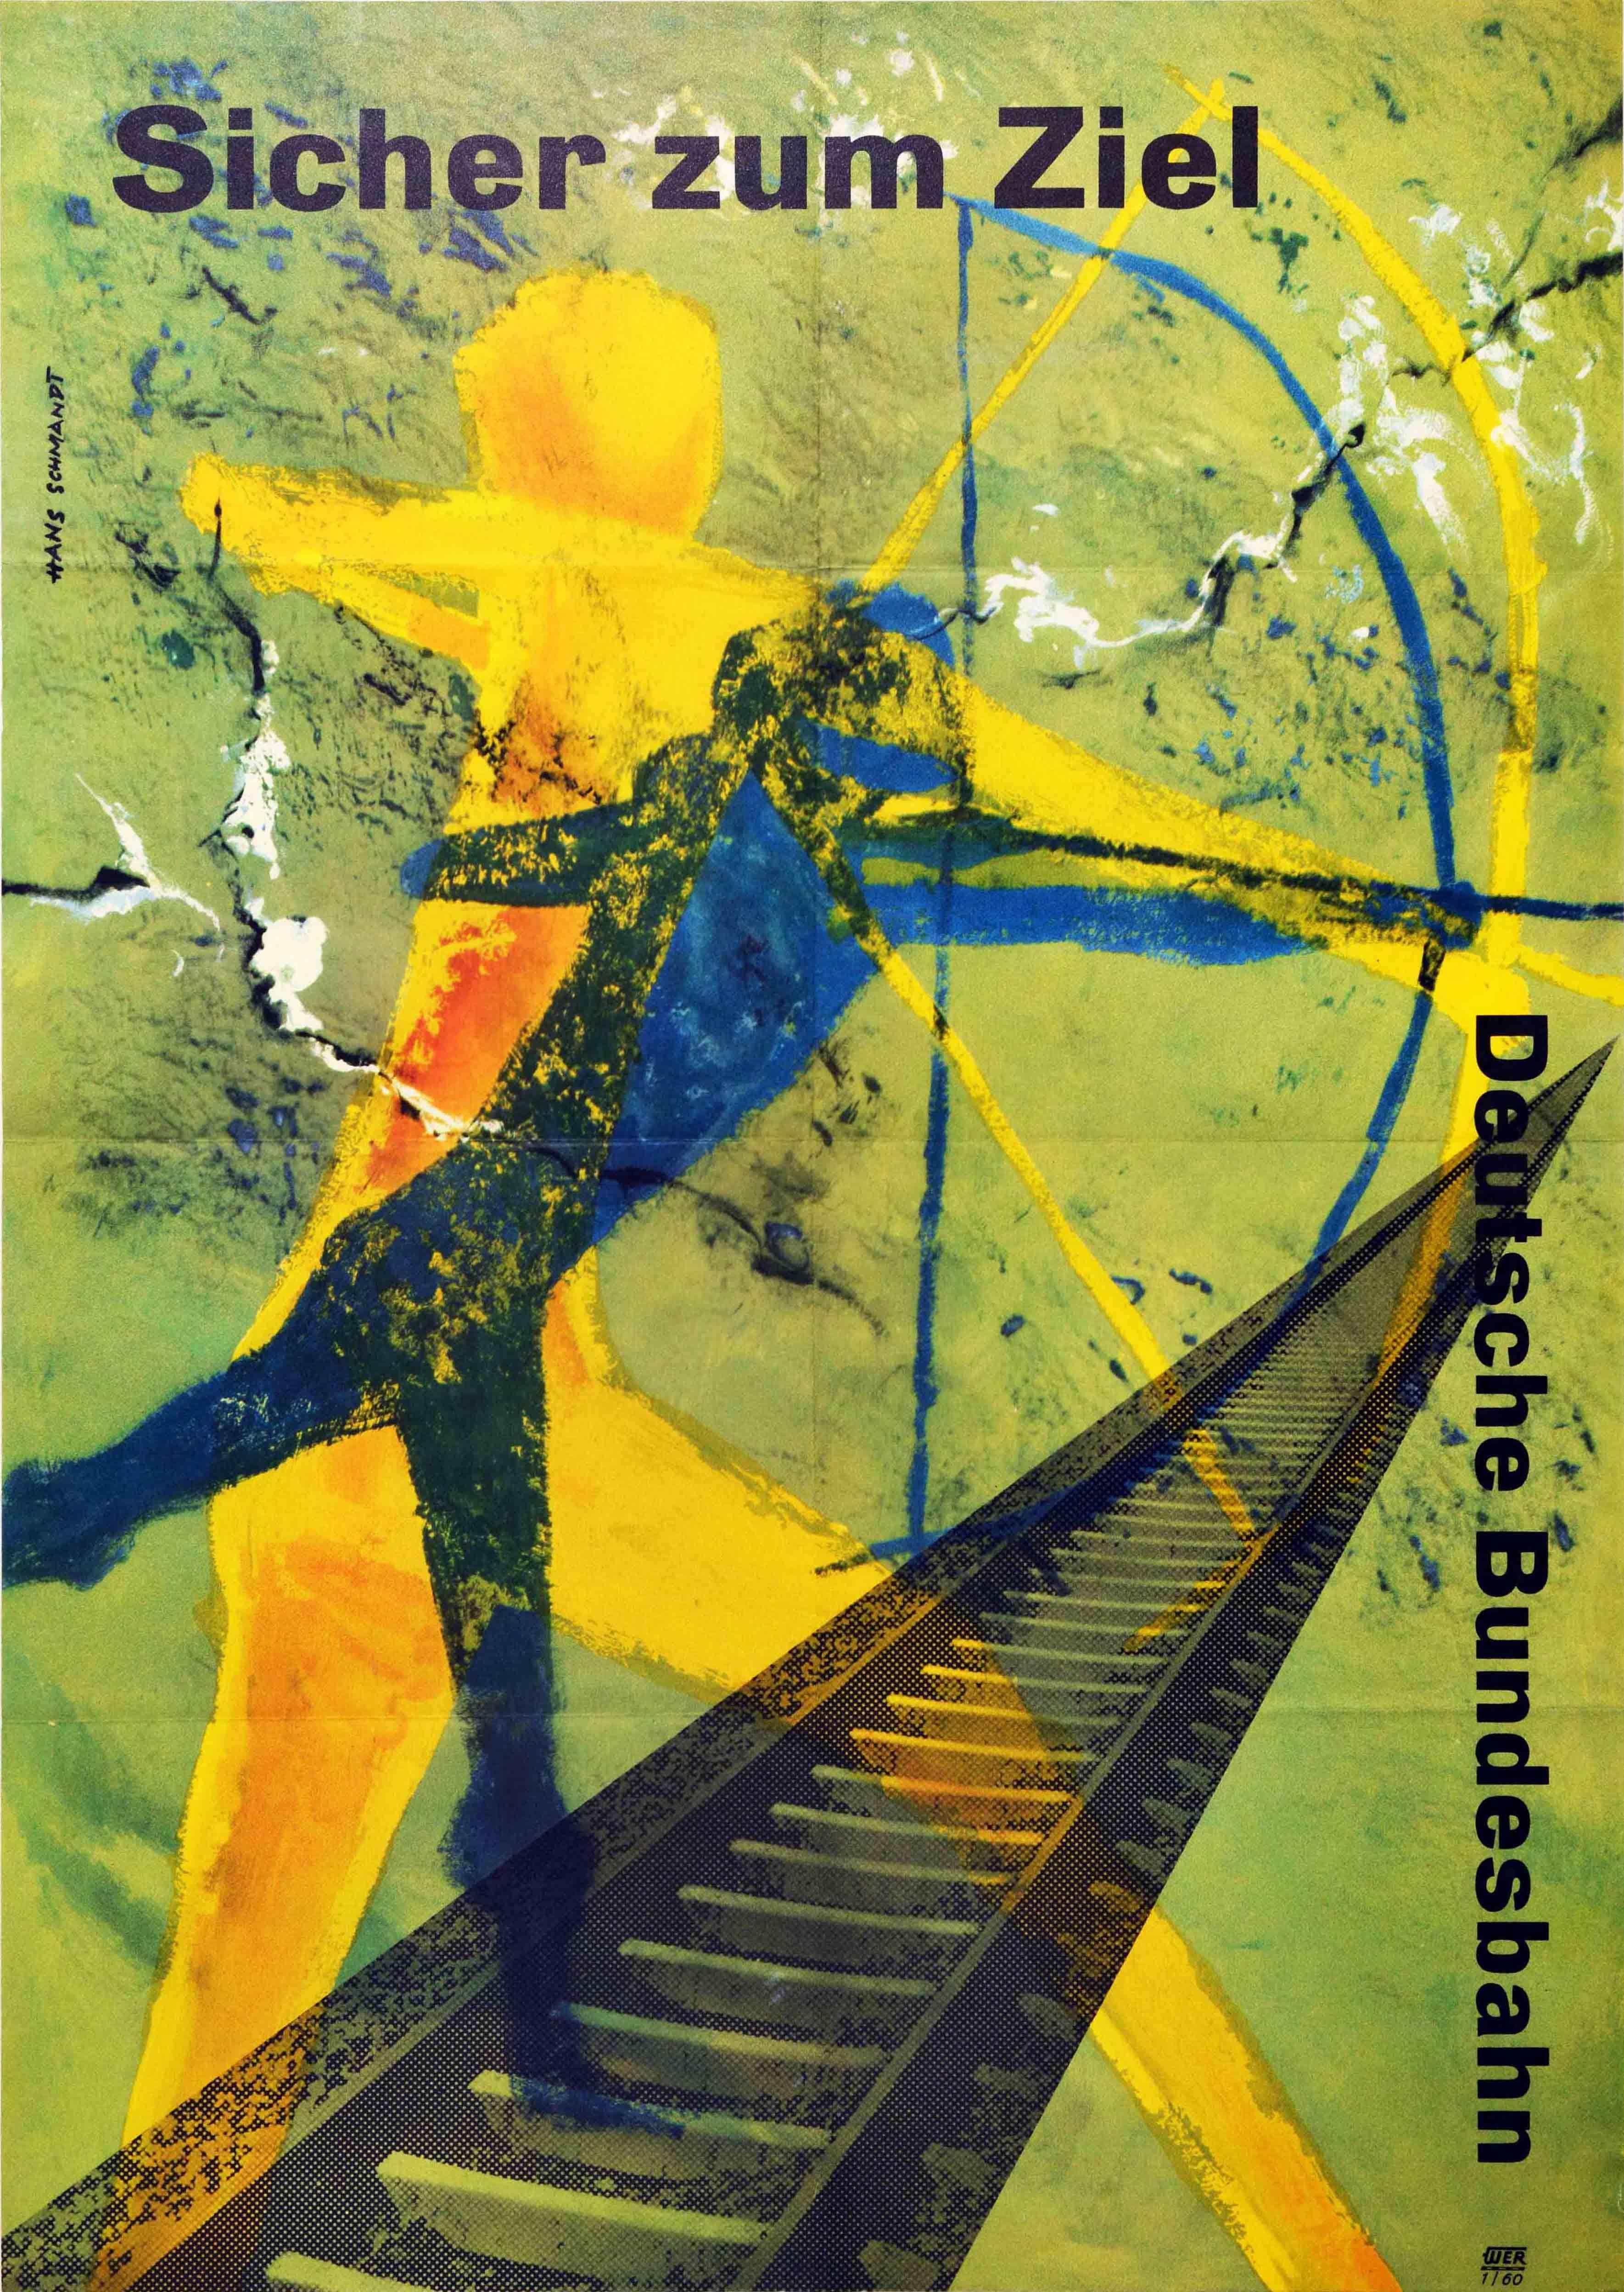 Original vintage travel poster issued by DB Deutsche Bundesbahn featuring a colourful illustration stylised as a cave painting depicting two yellow and blue people as silhouettes shooting arrows with a railway train track in the foreground. Text in